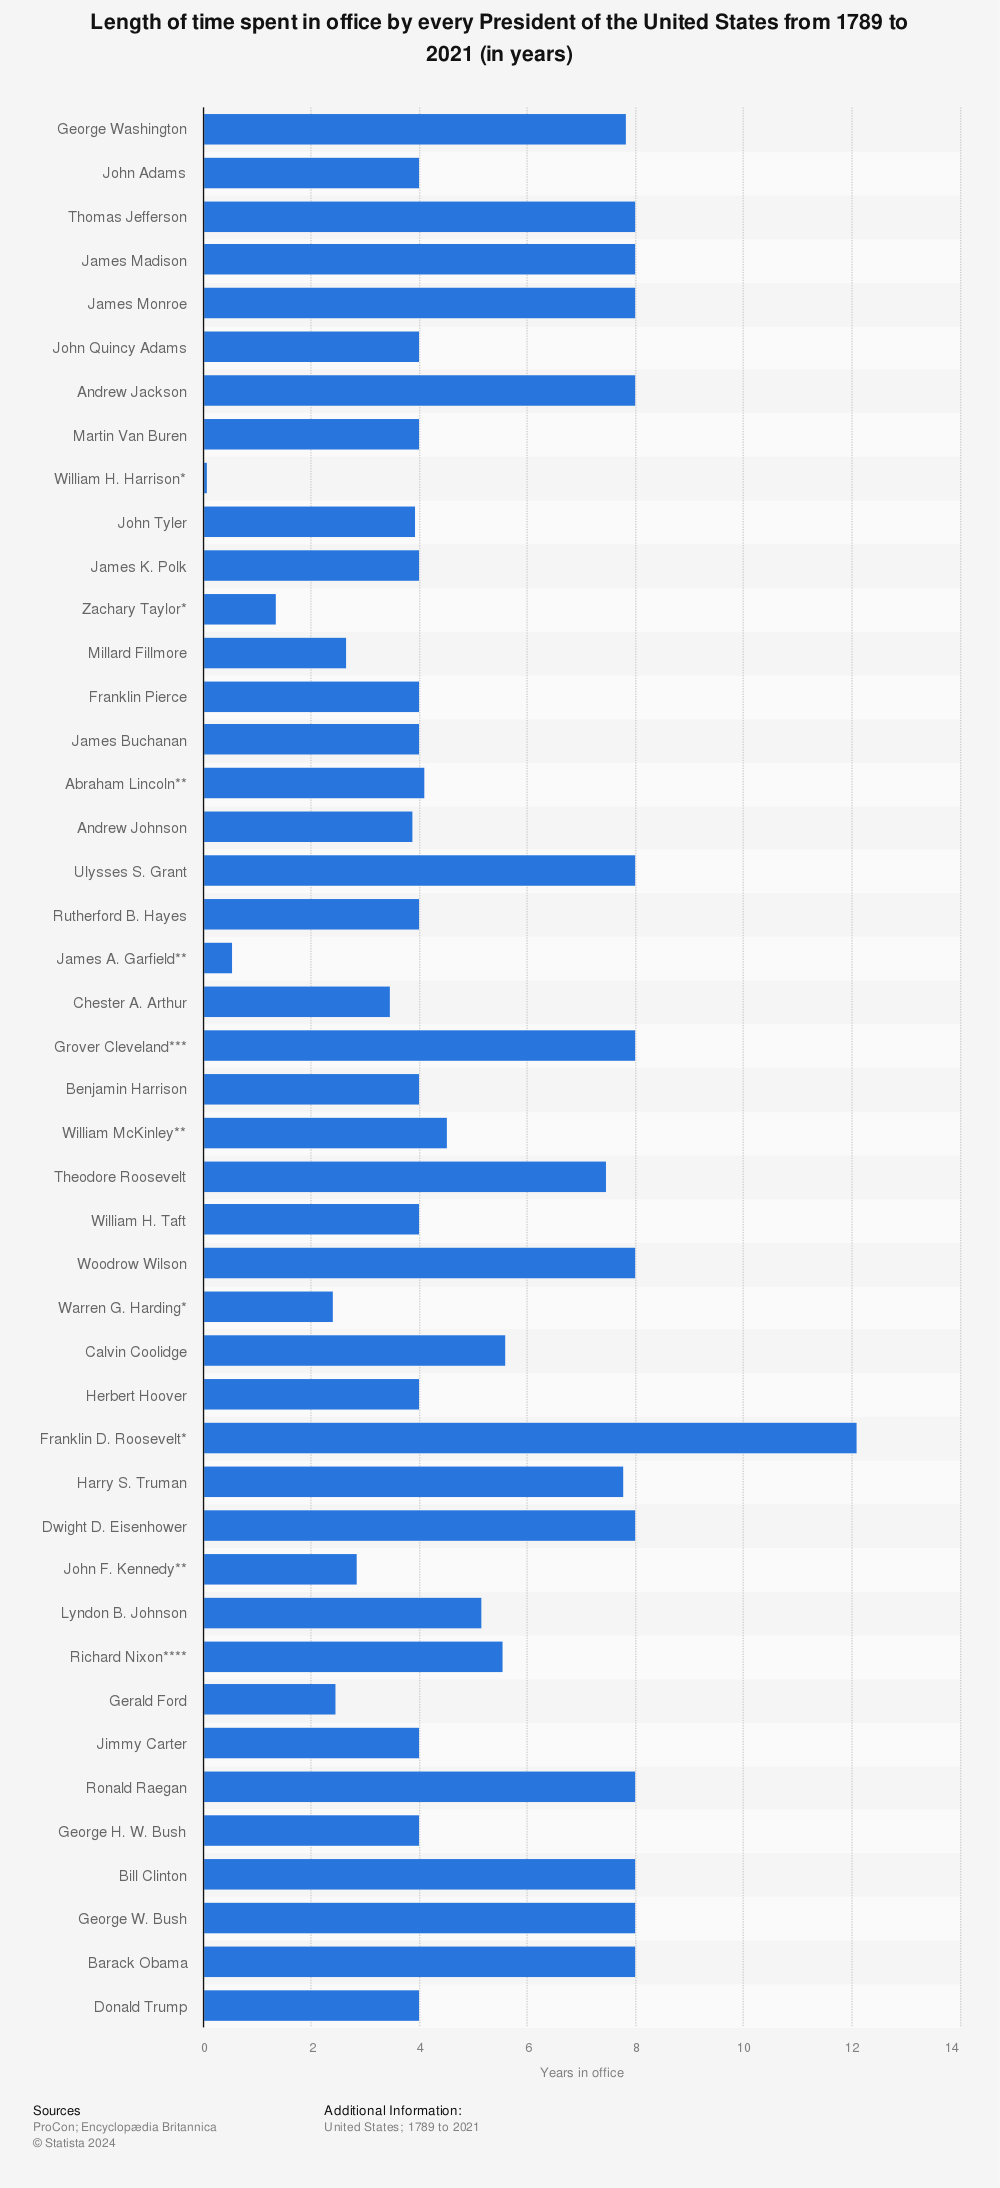 Statistic: Length of time spent in office by every President of the United States from 1789 to 2021 (in years) | Statista